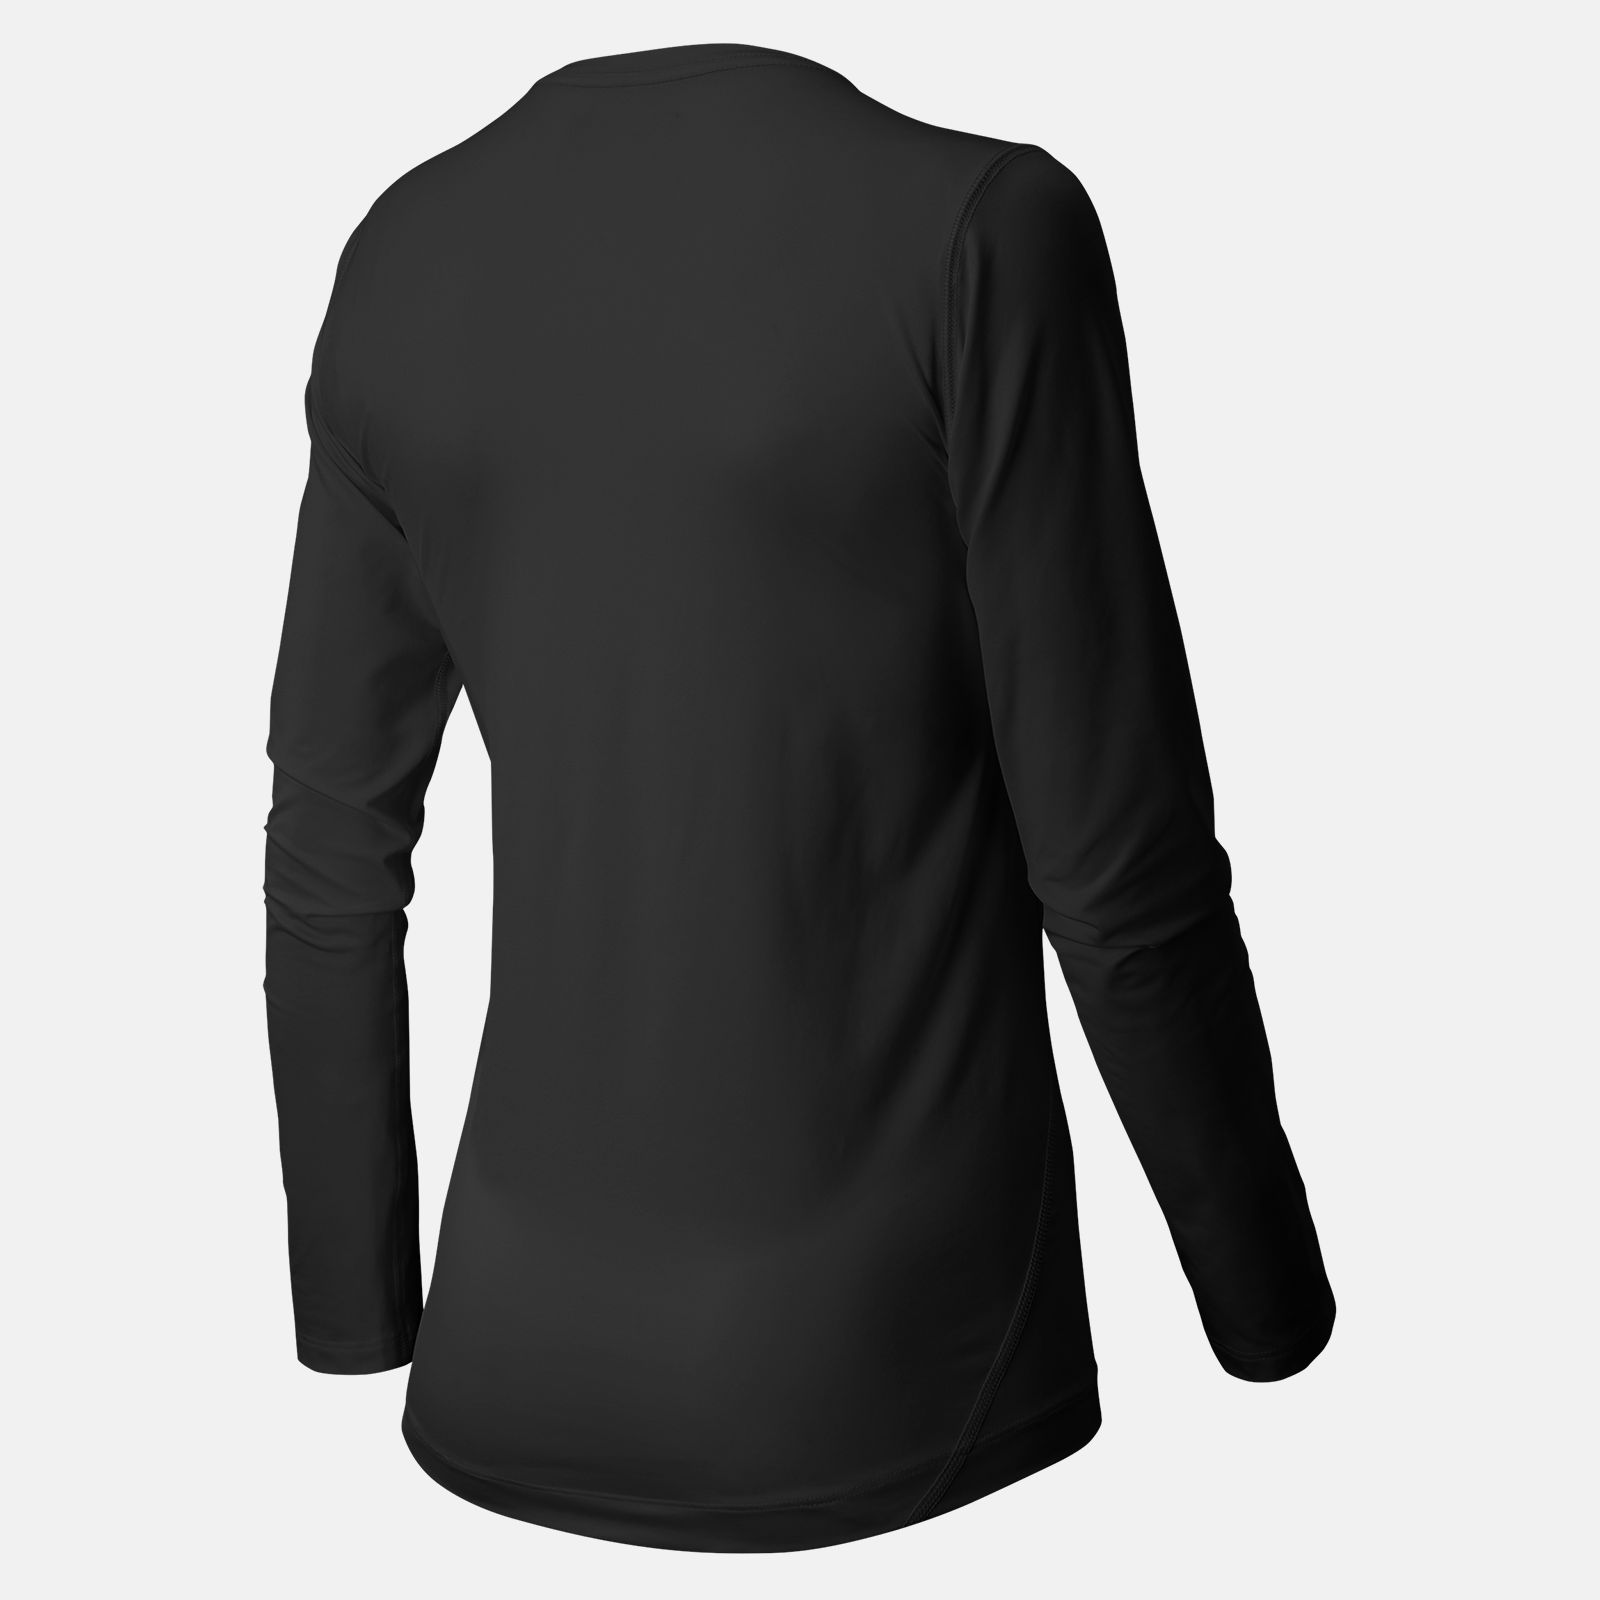 NB Long Sleeve Compression Top -